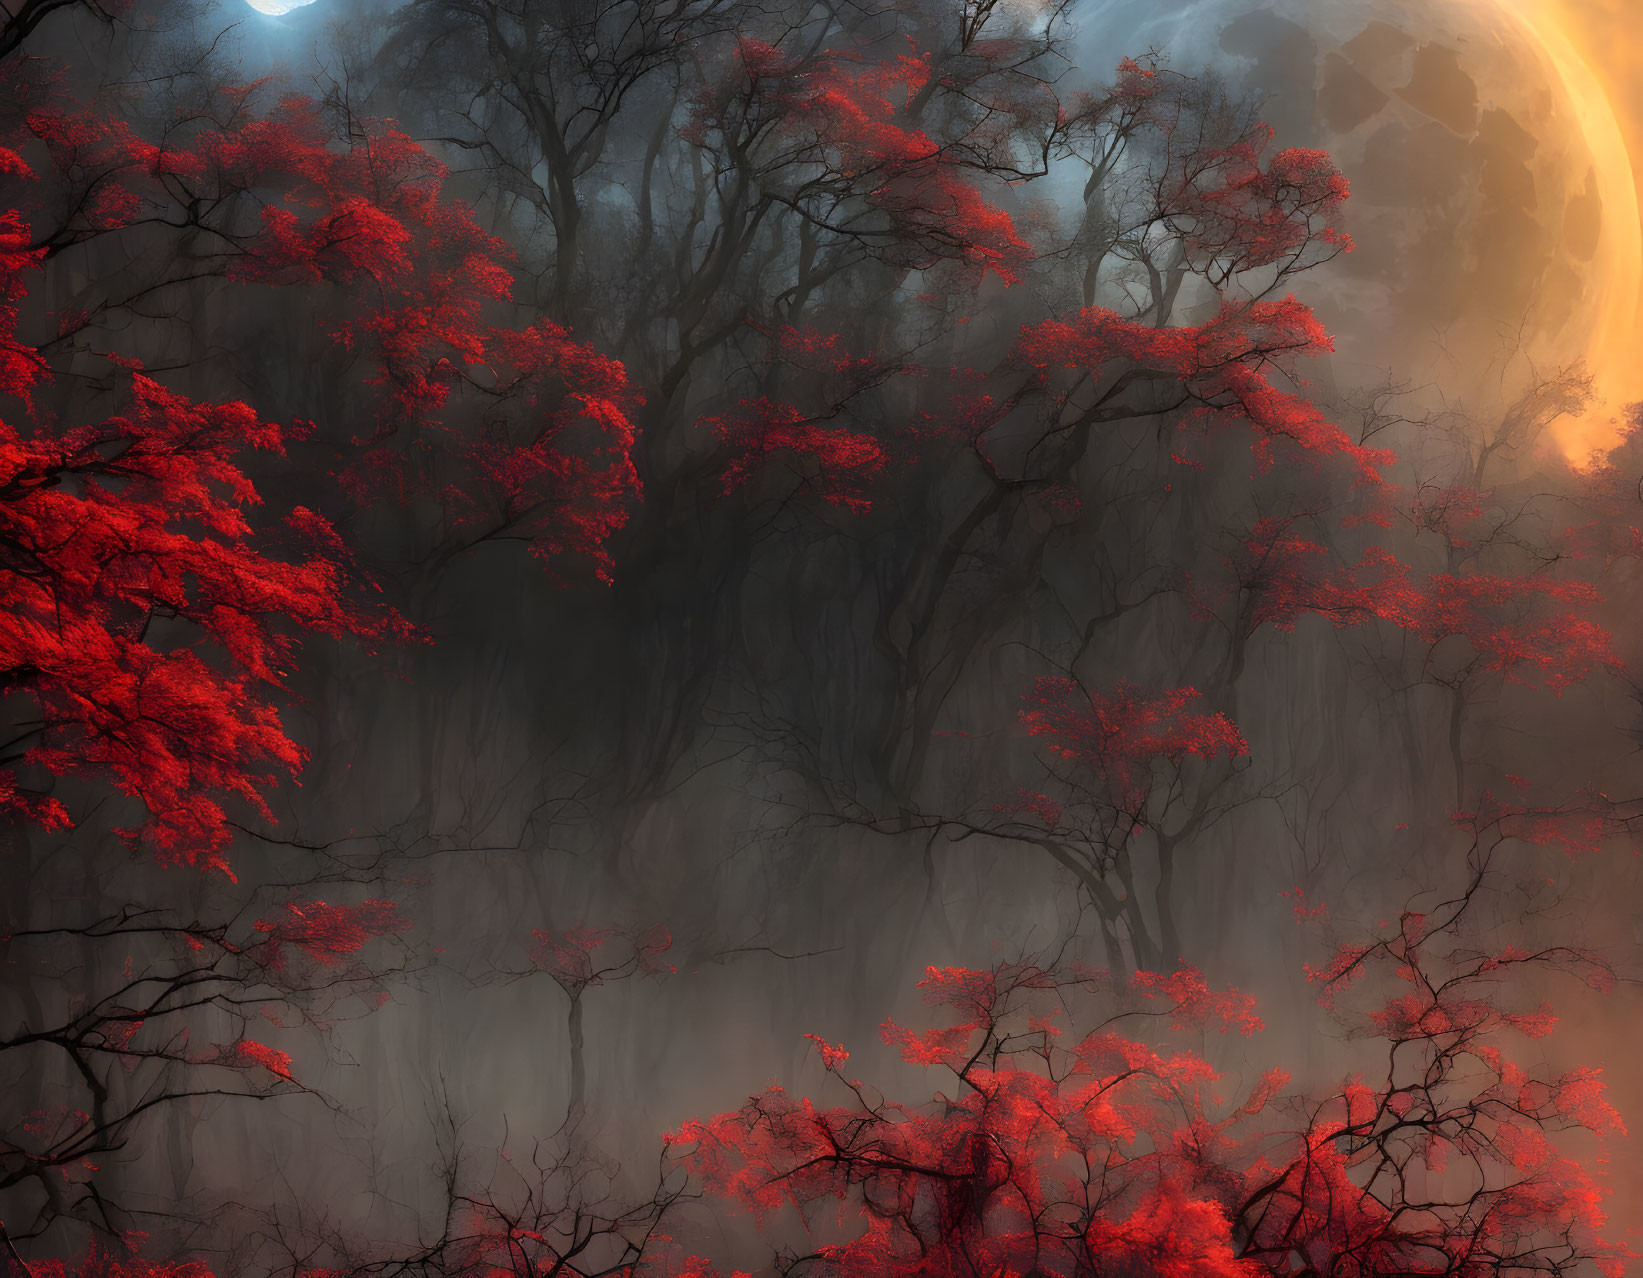 The Overgrown Forest of the Blood Moon